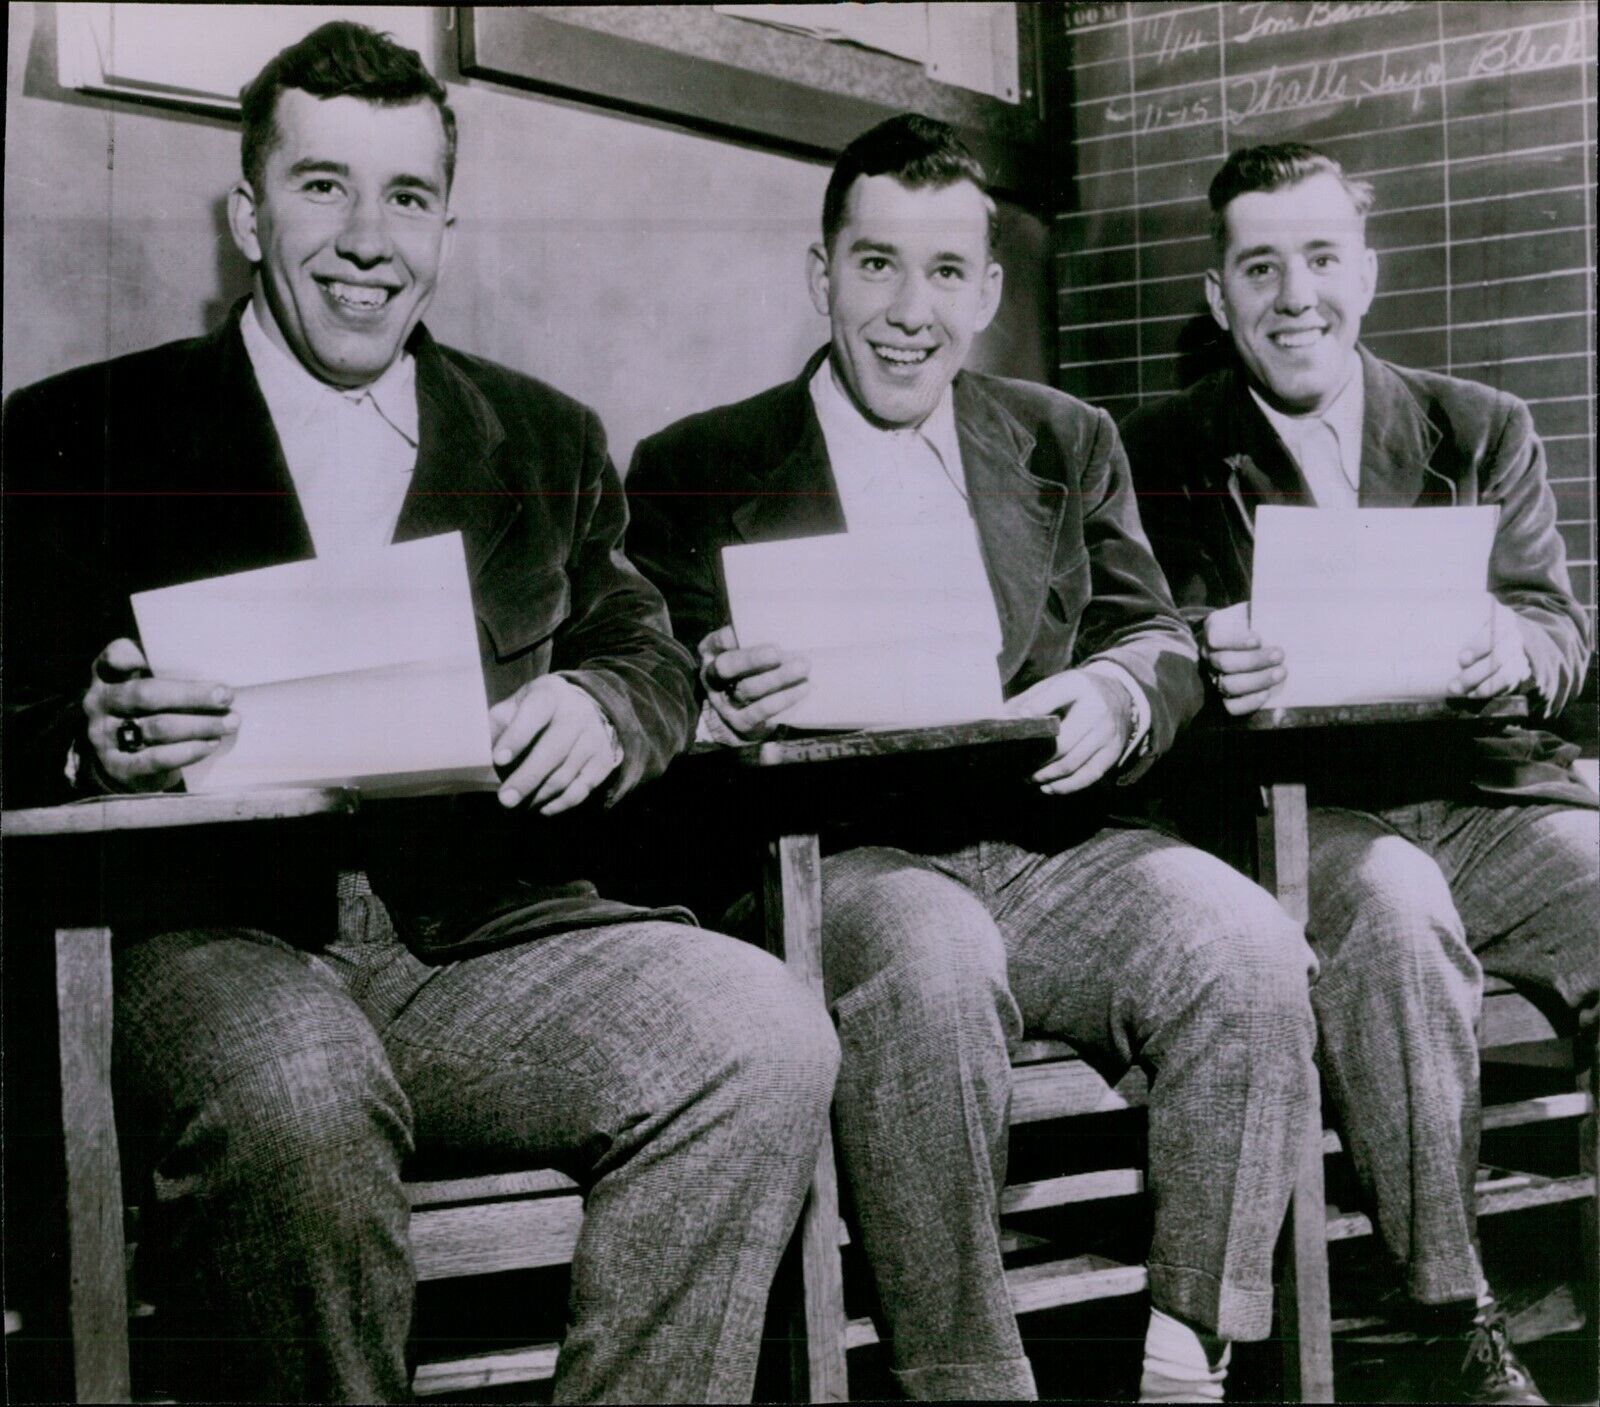 LG788 1950 Wire Photo TRIPLETS INDUCTED Draft Notices Identical Brothers Smiling